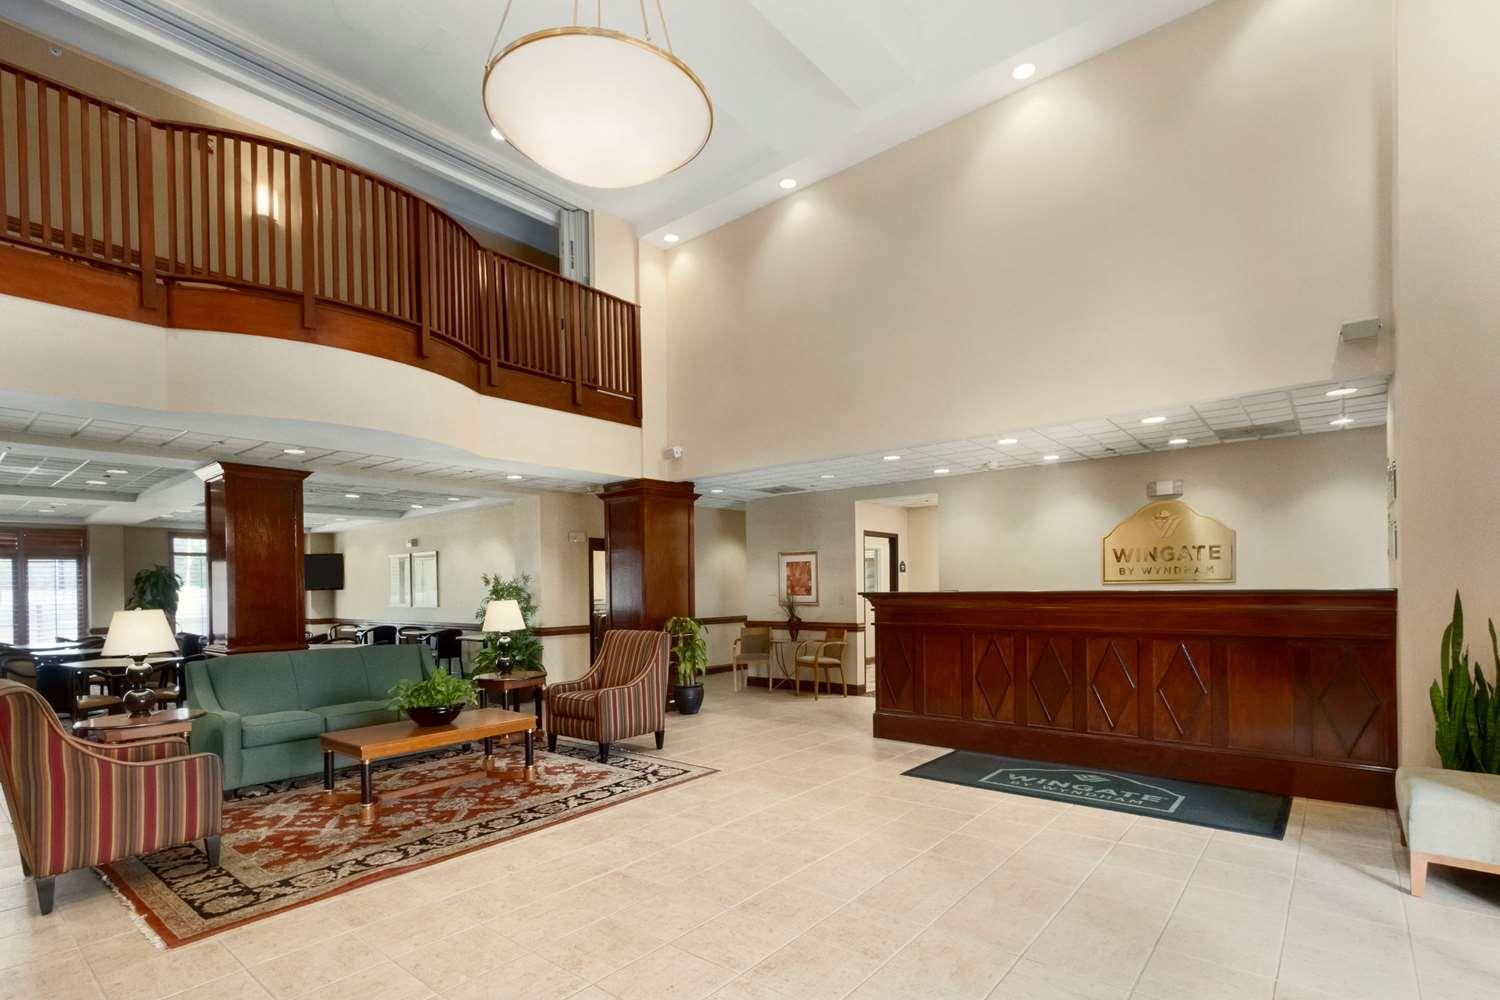 Vista Lobby WINGATE BY WYNDHAM CHARLOTTE AIRPORT SOUTH/ I-77